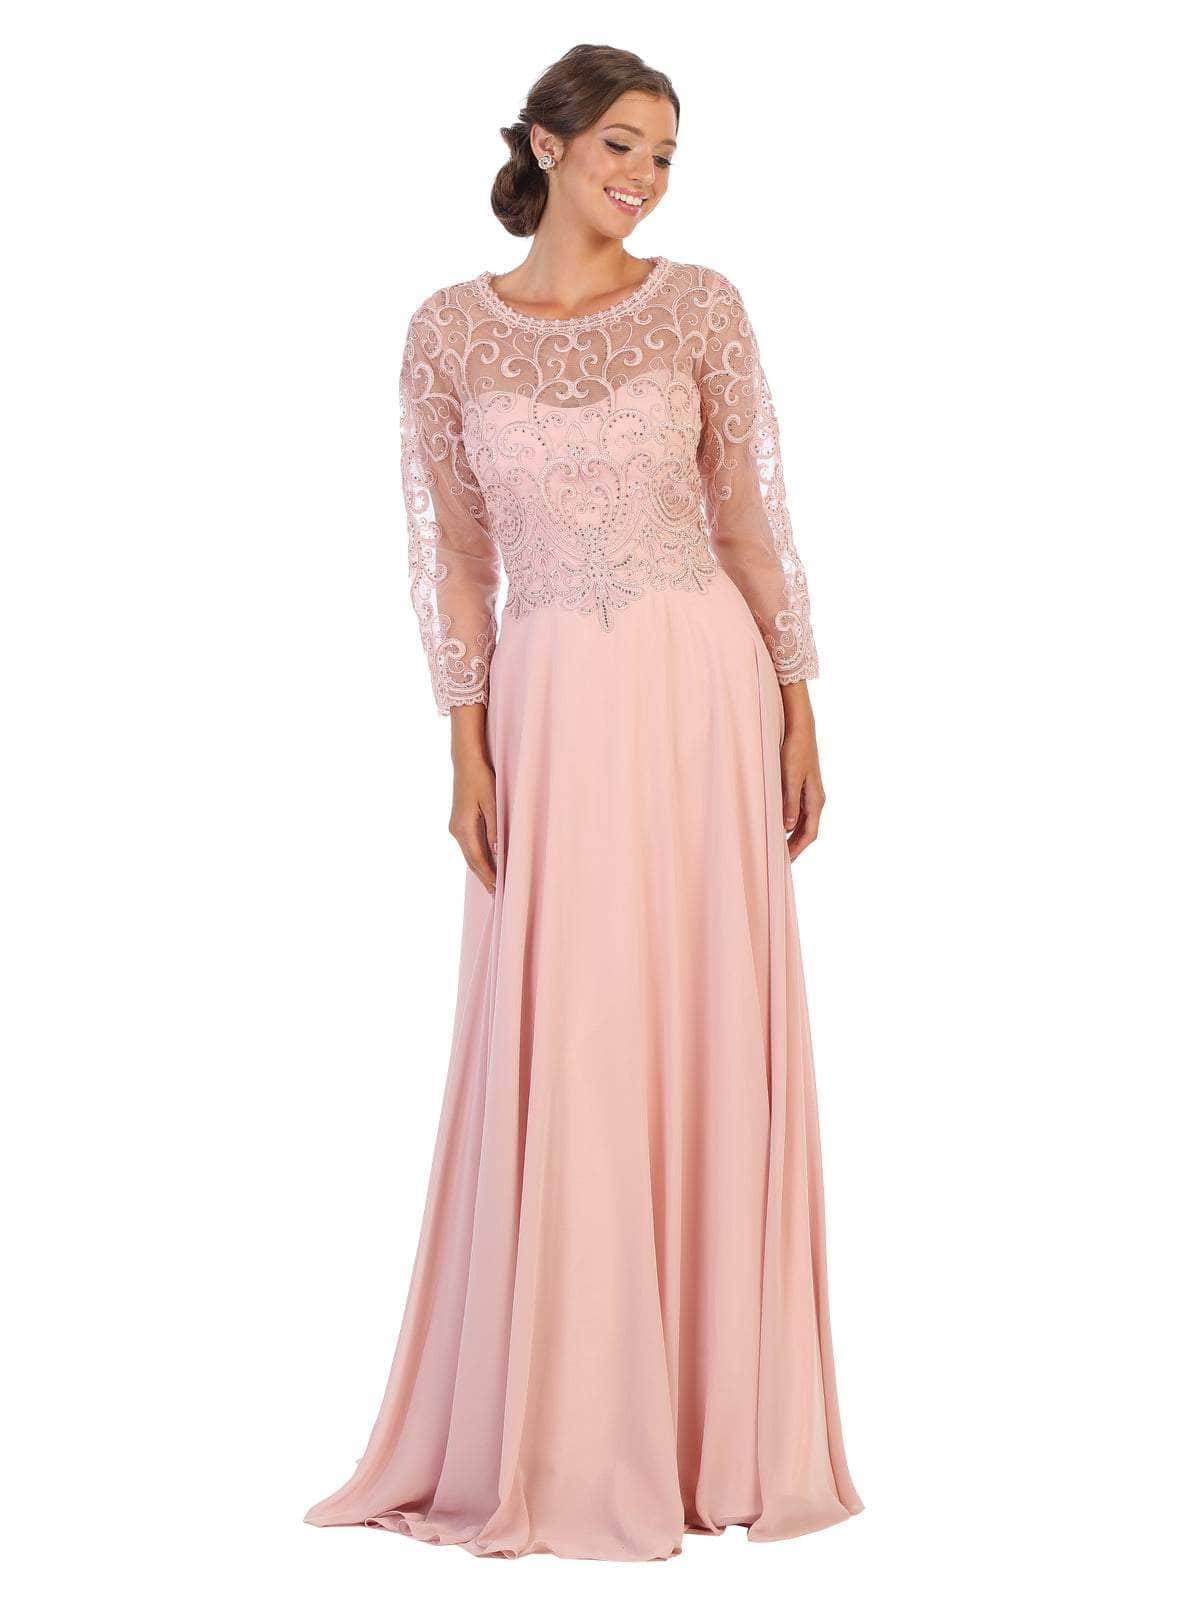 May Queen - MQ1706 Embroidered Illusion Jewel A-Line Dress Mother of the Bride Dresses M / Dusty Rose